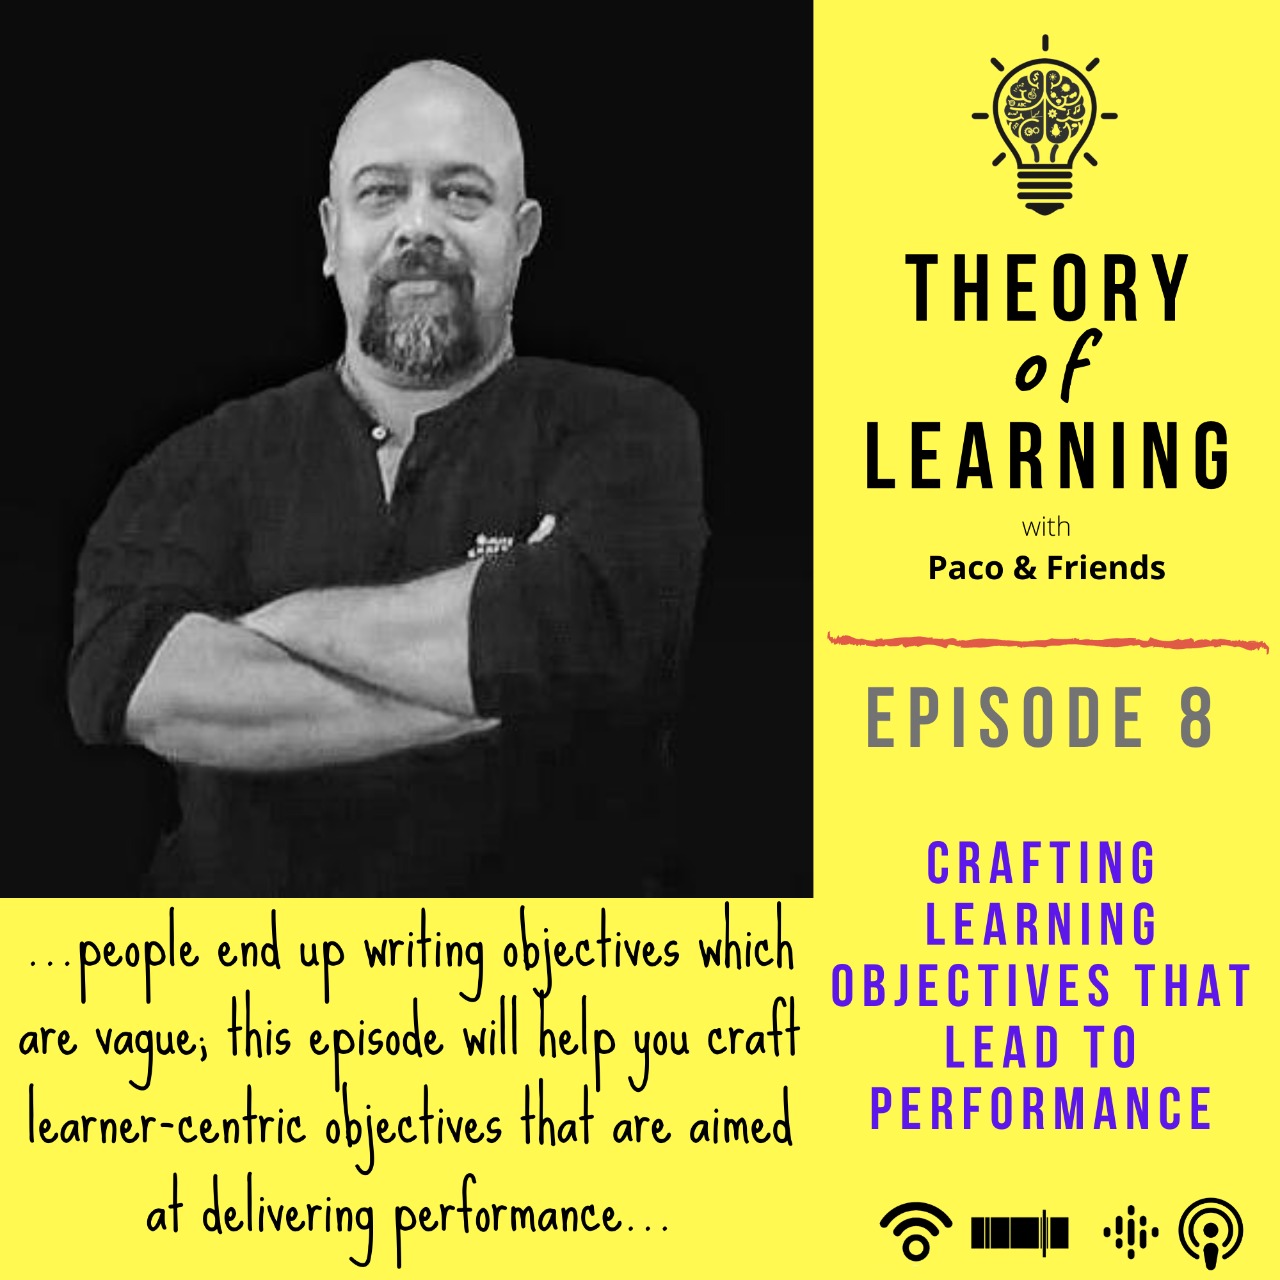 Episode #8: Crafting Learning Objectives that lead to Performance